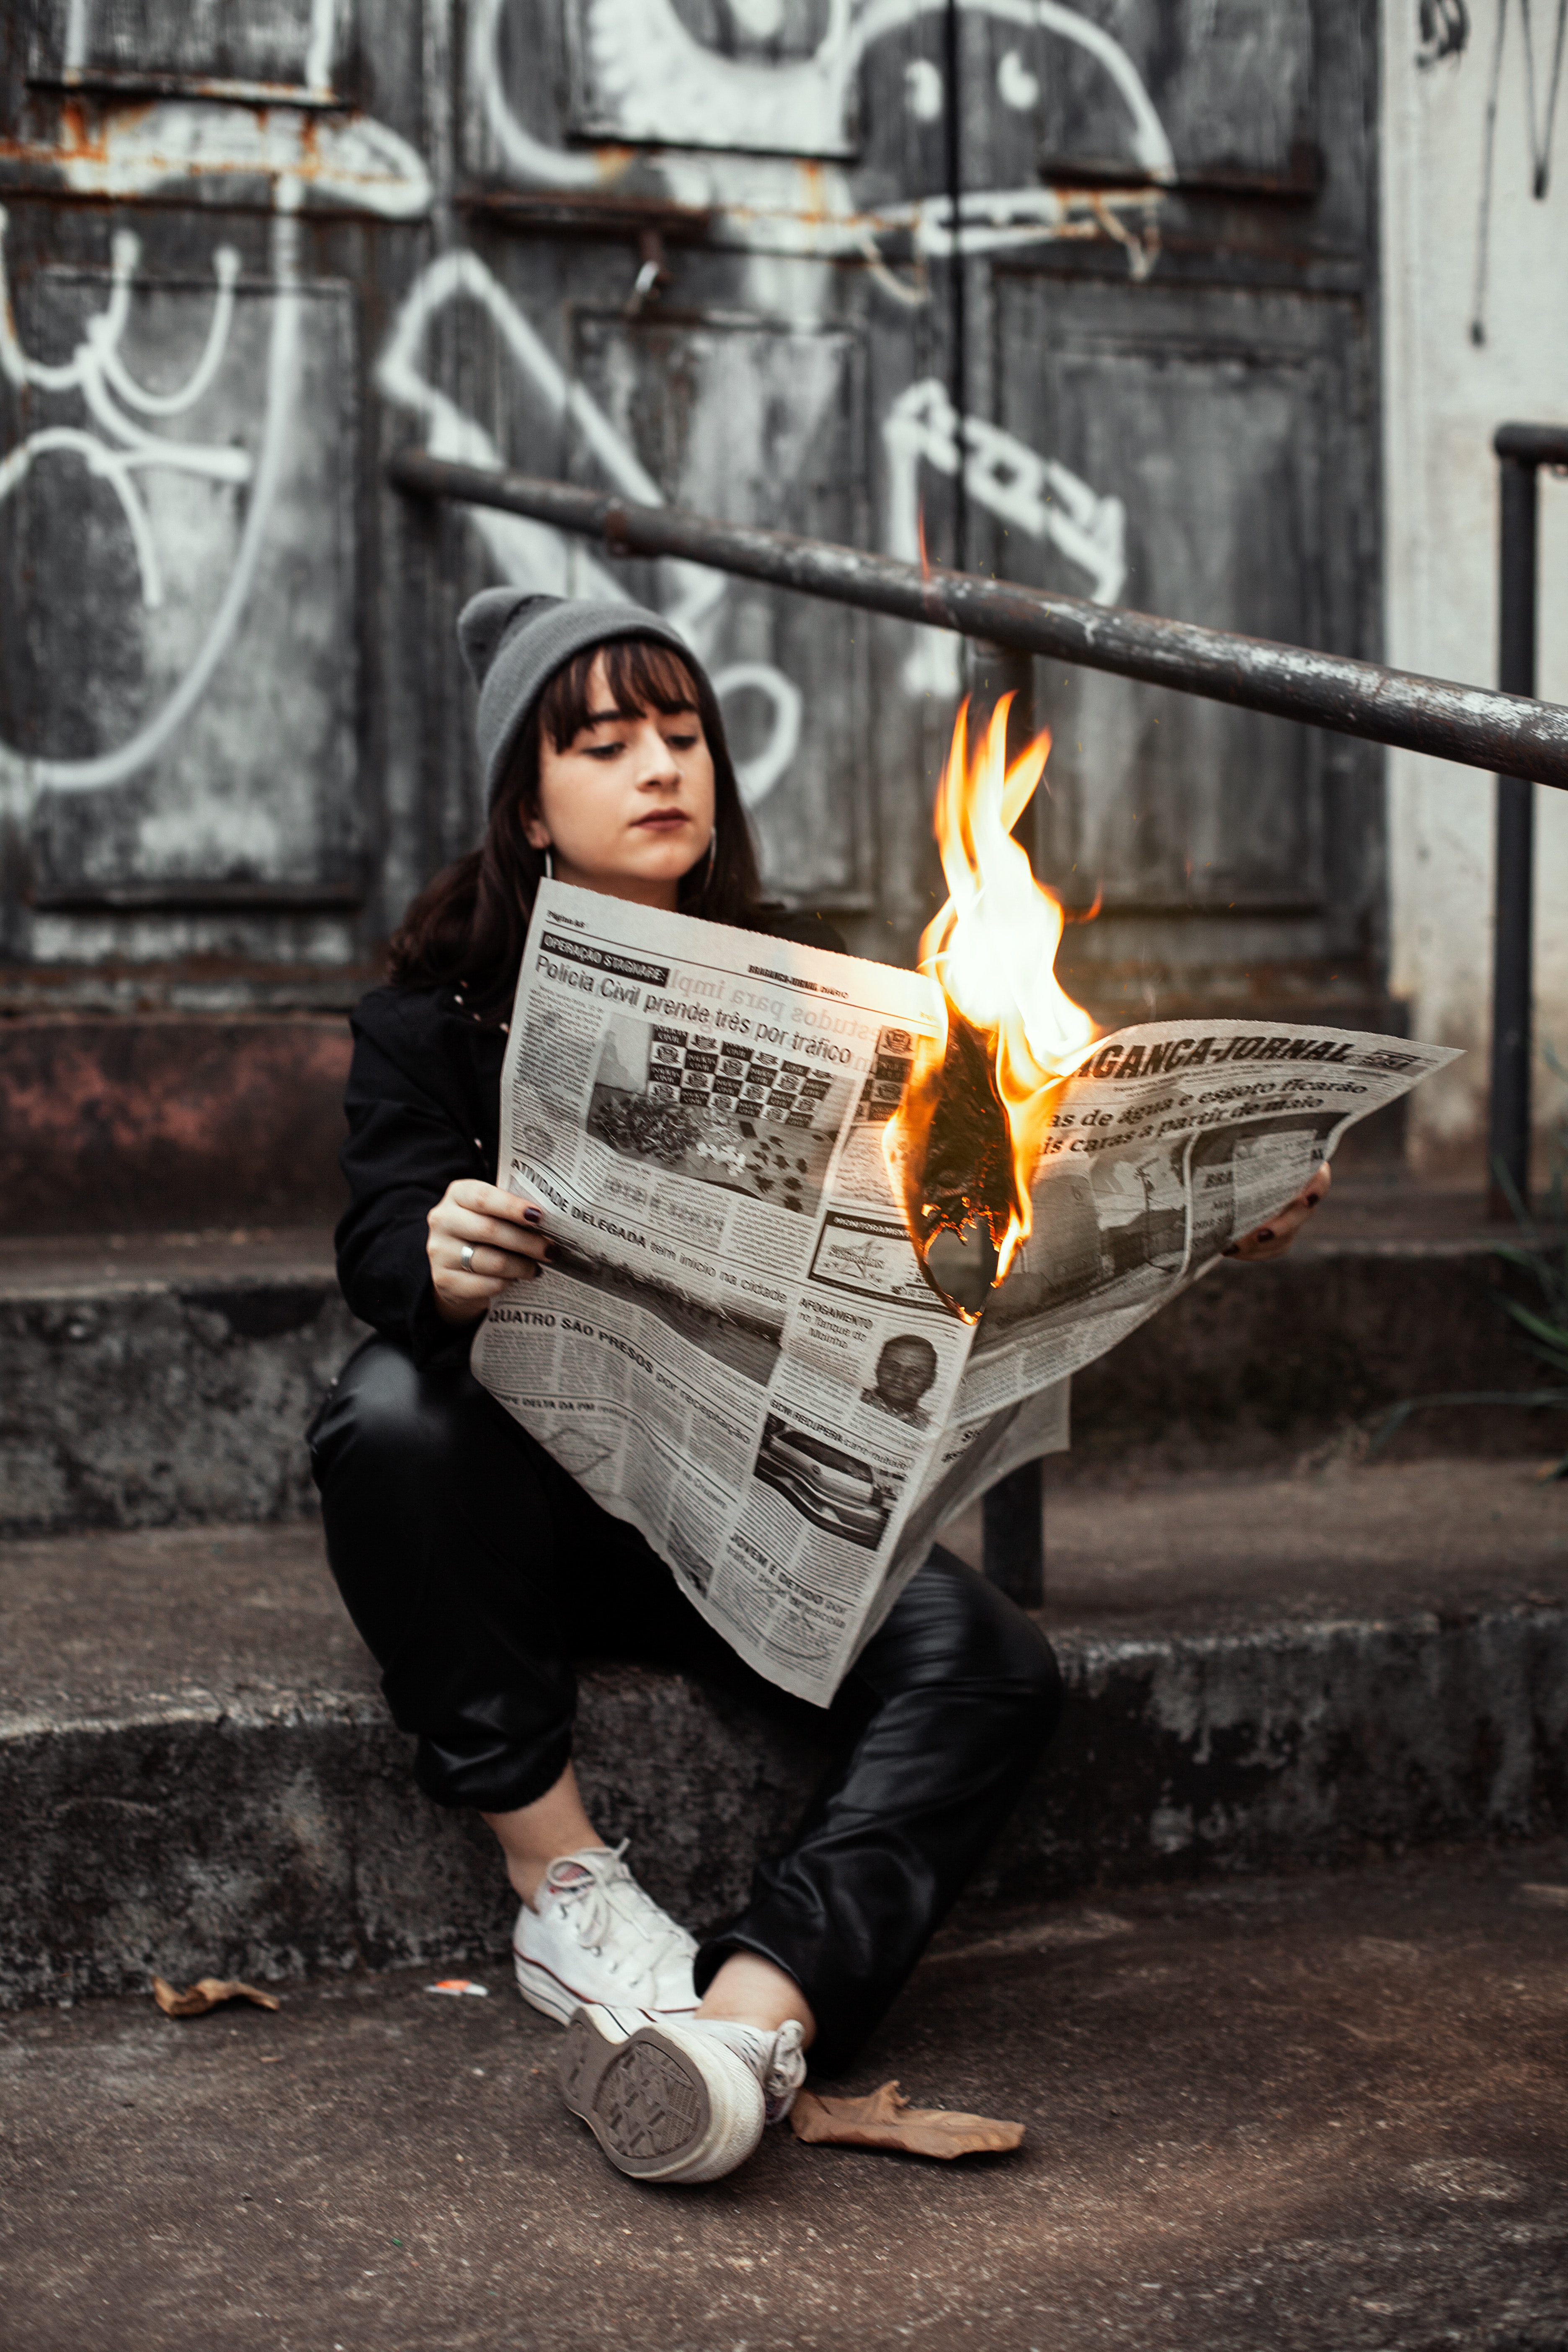 A woman sitting in an alleyway holding a burning newspaper  